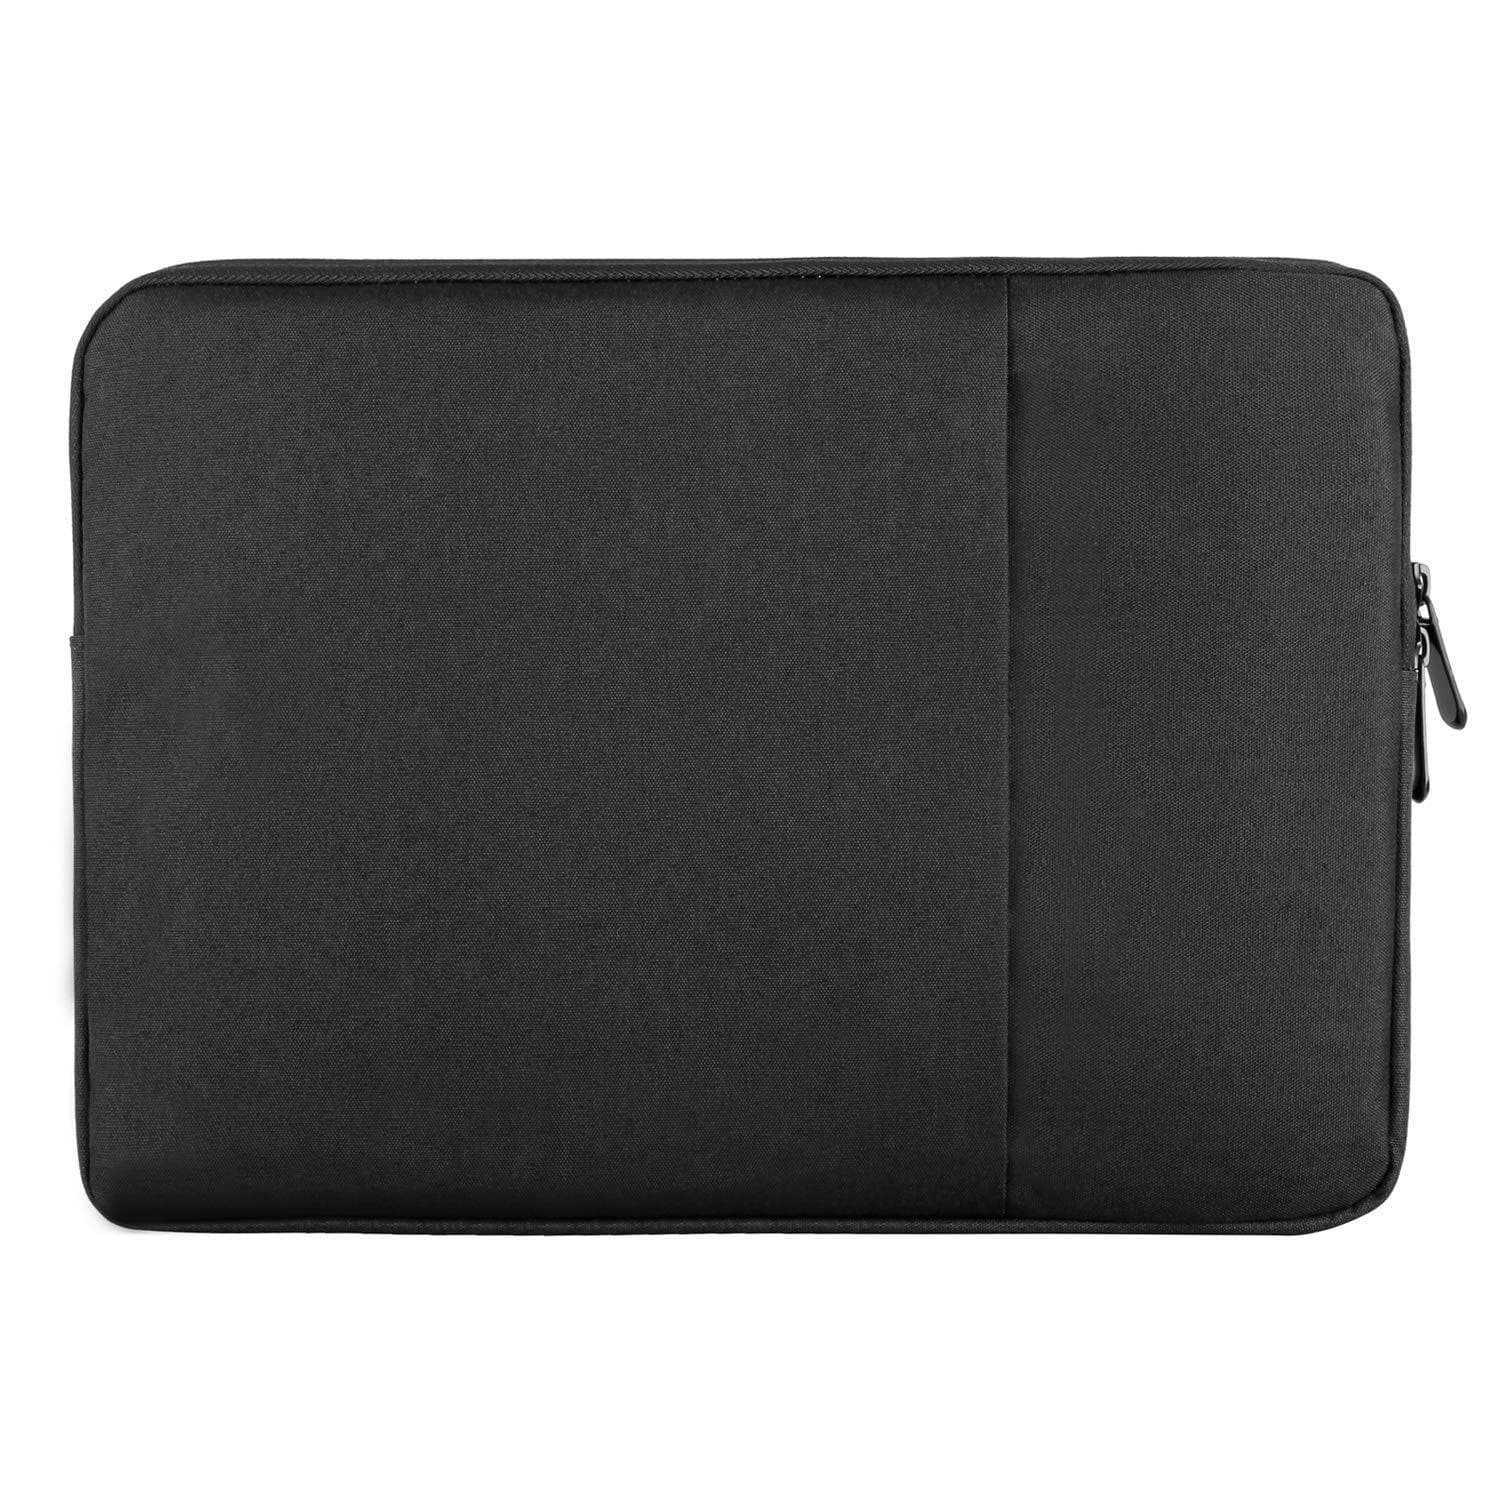 Uperfect Sleeve for Portable Monitors - 17-18 Inches